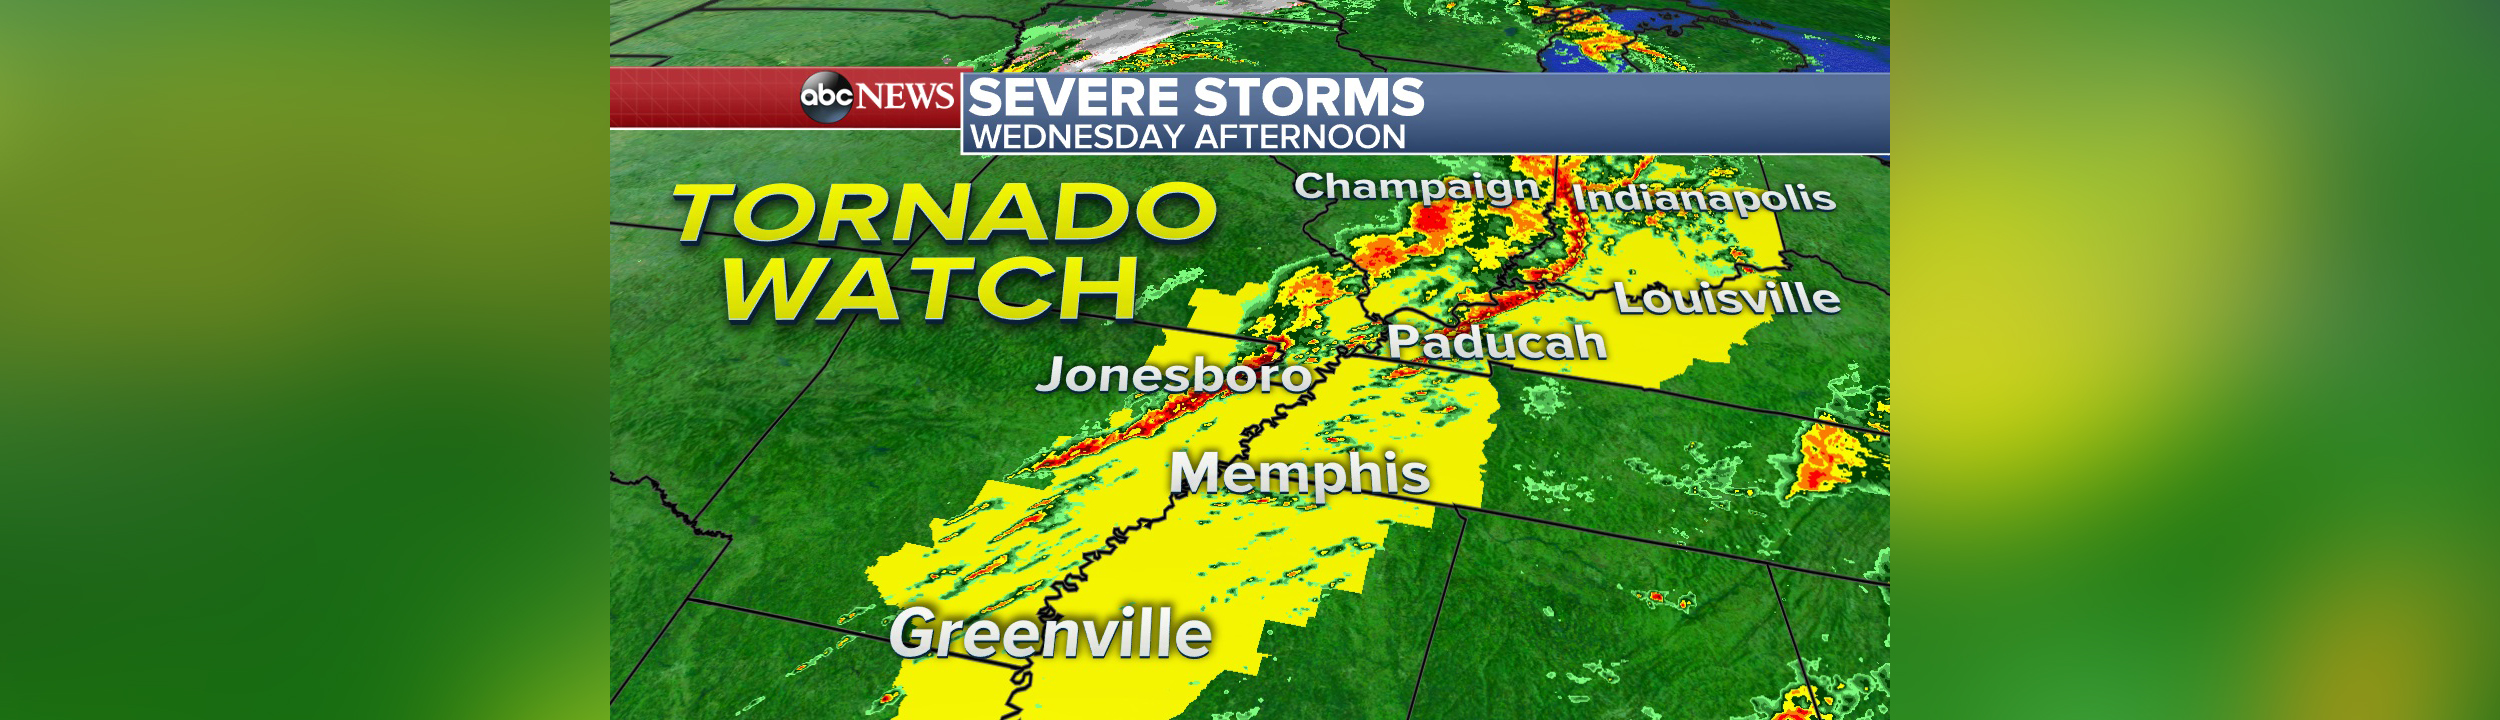 PHOTO: Parts of 8 states from Louisiana to Indiana are under a Tornado Watch on Wednesday afternoon.